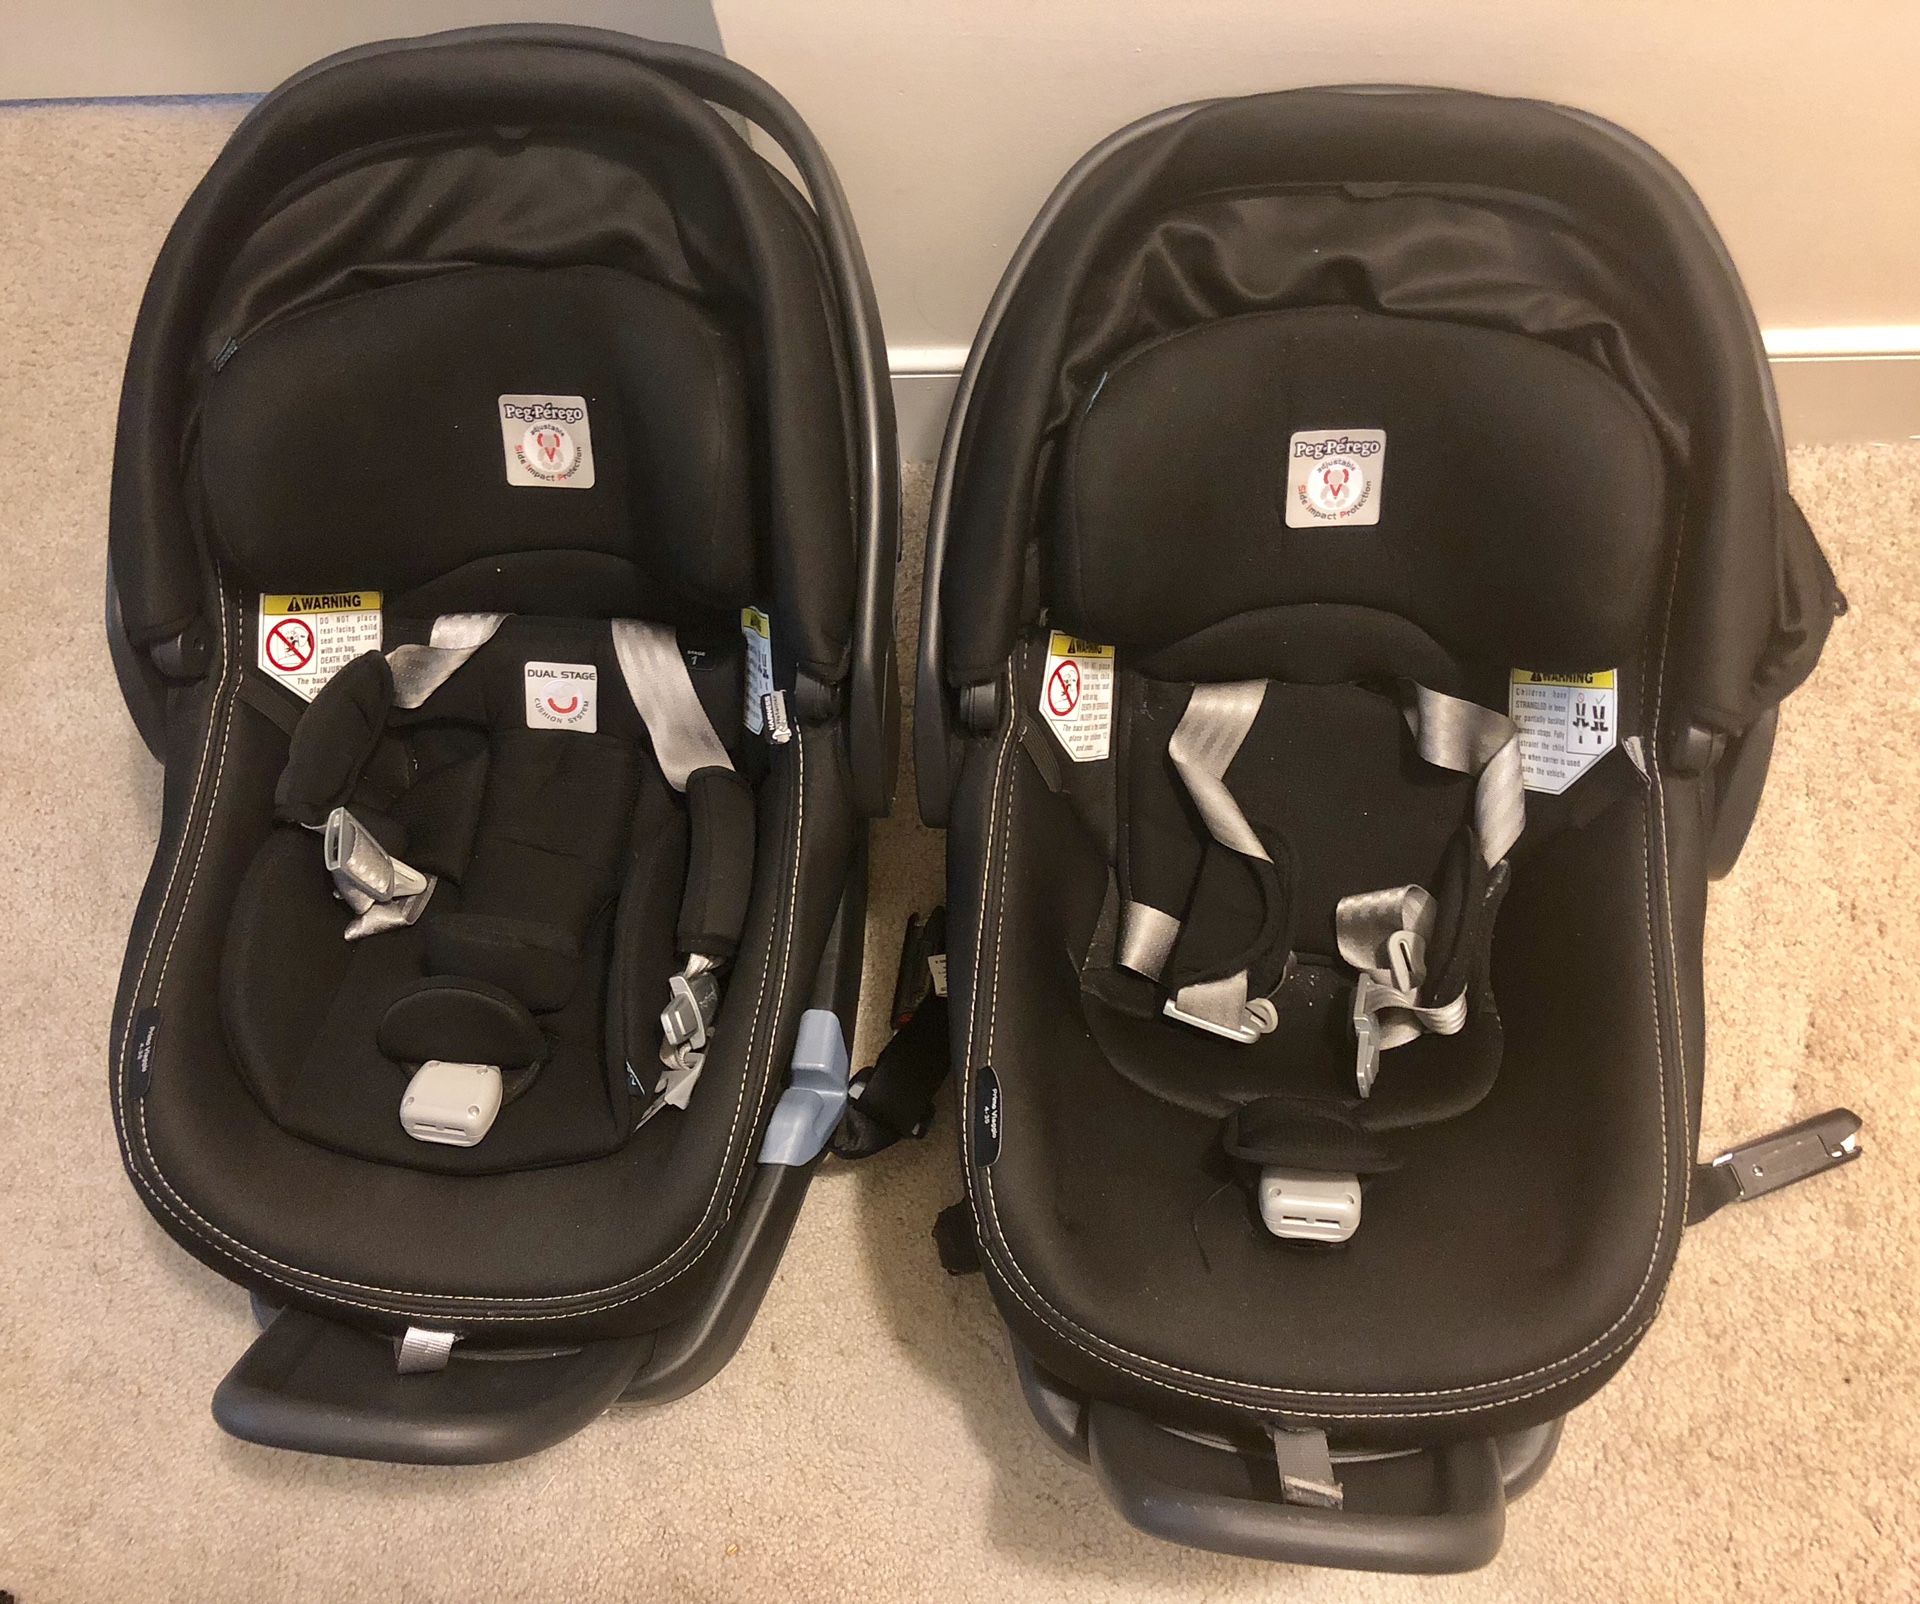 2 (twins) - Infant size peg perego car seat with base